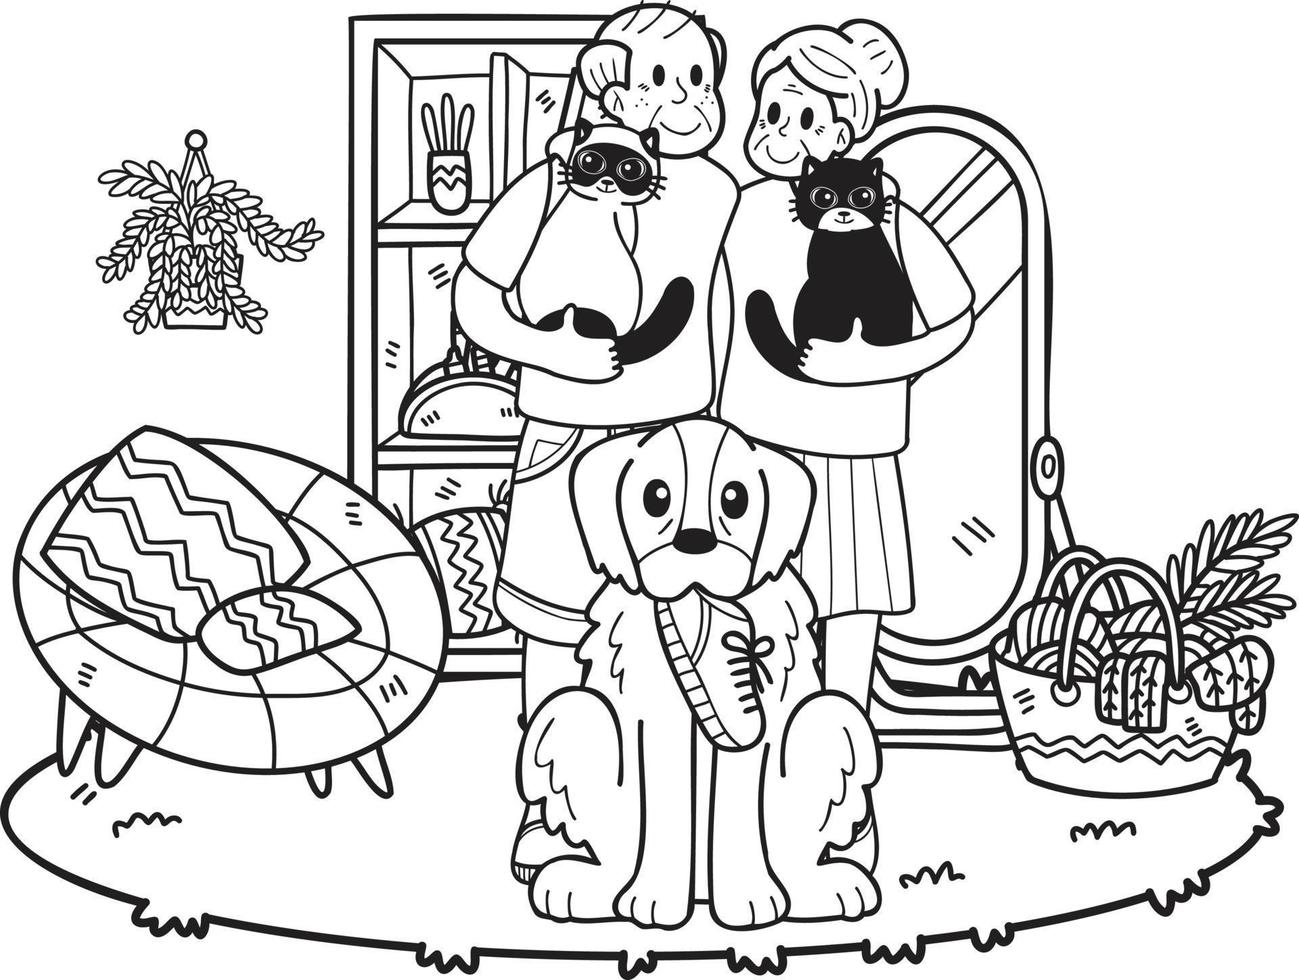 Hand Drawn Elderly play with dogs and cats illustration in doodle style vector